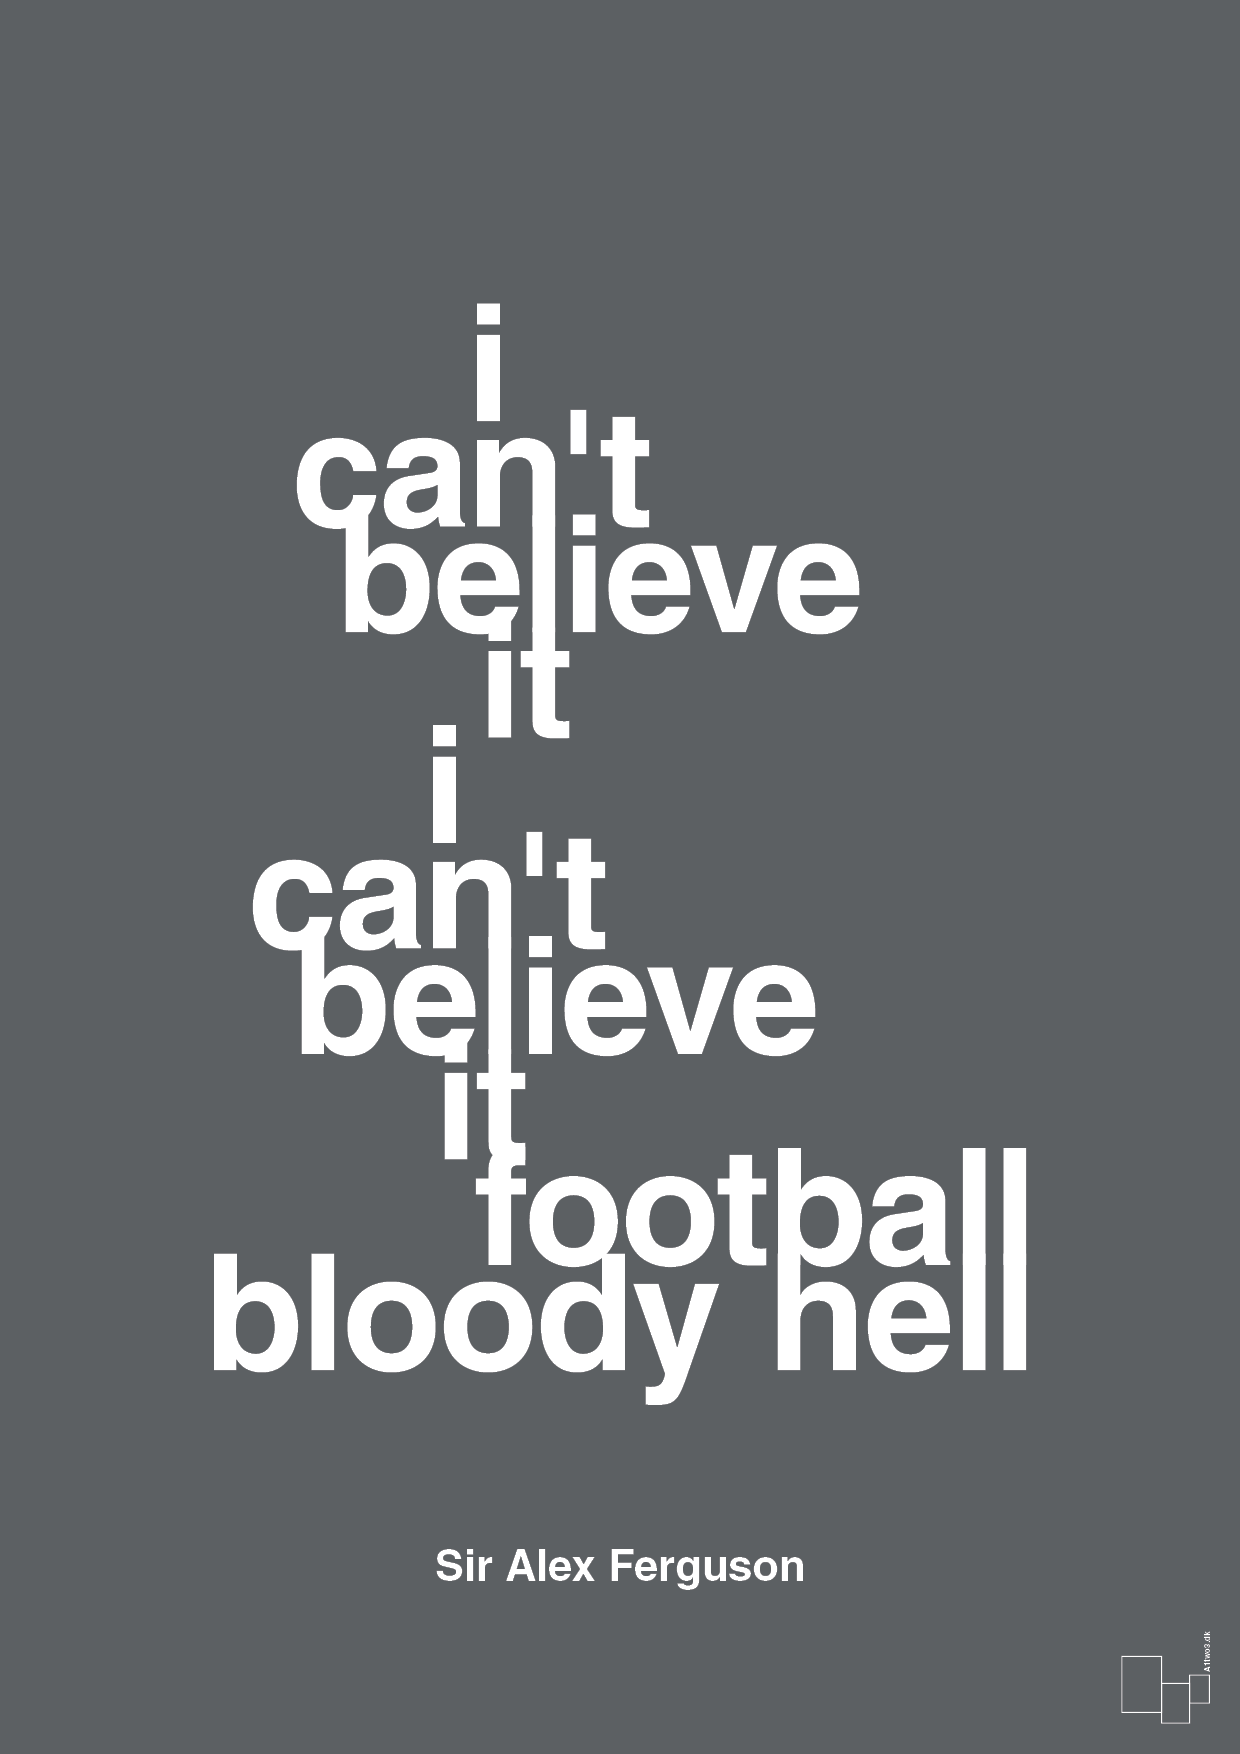 i can't believe it i can't believe it football bloody hell - Plakat med Citater i Graphic Charcoal